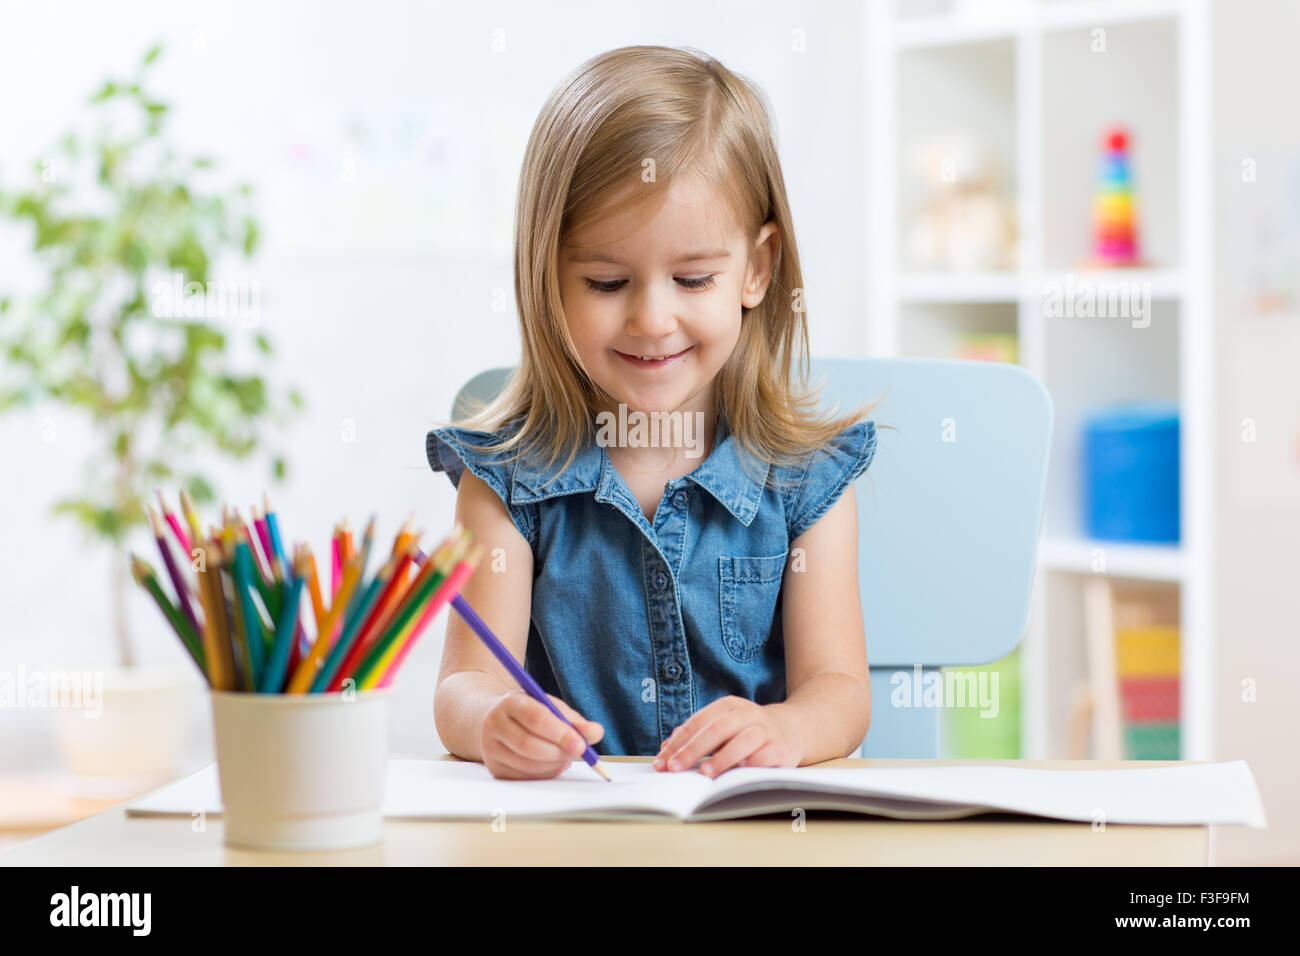 Portrait of lovely girl drawing with colorful pencils Stock Photo